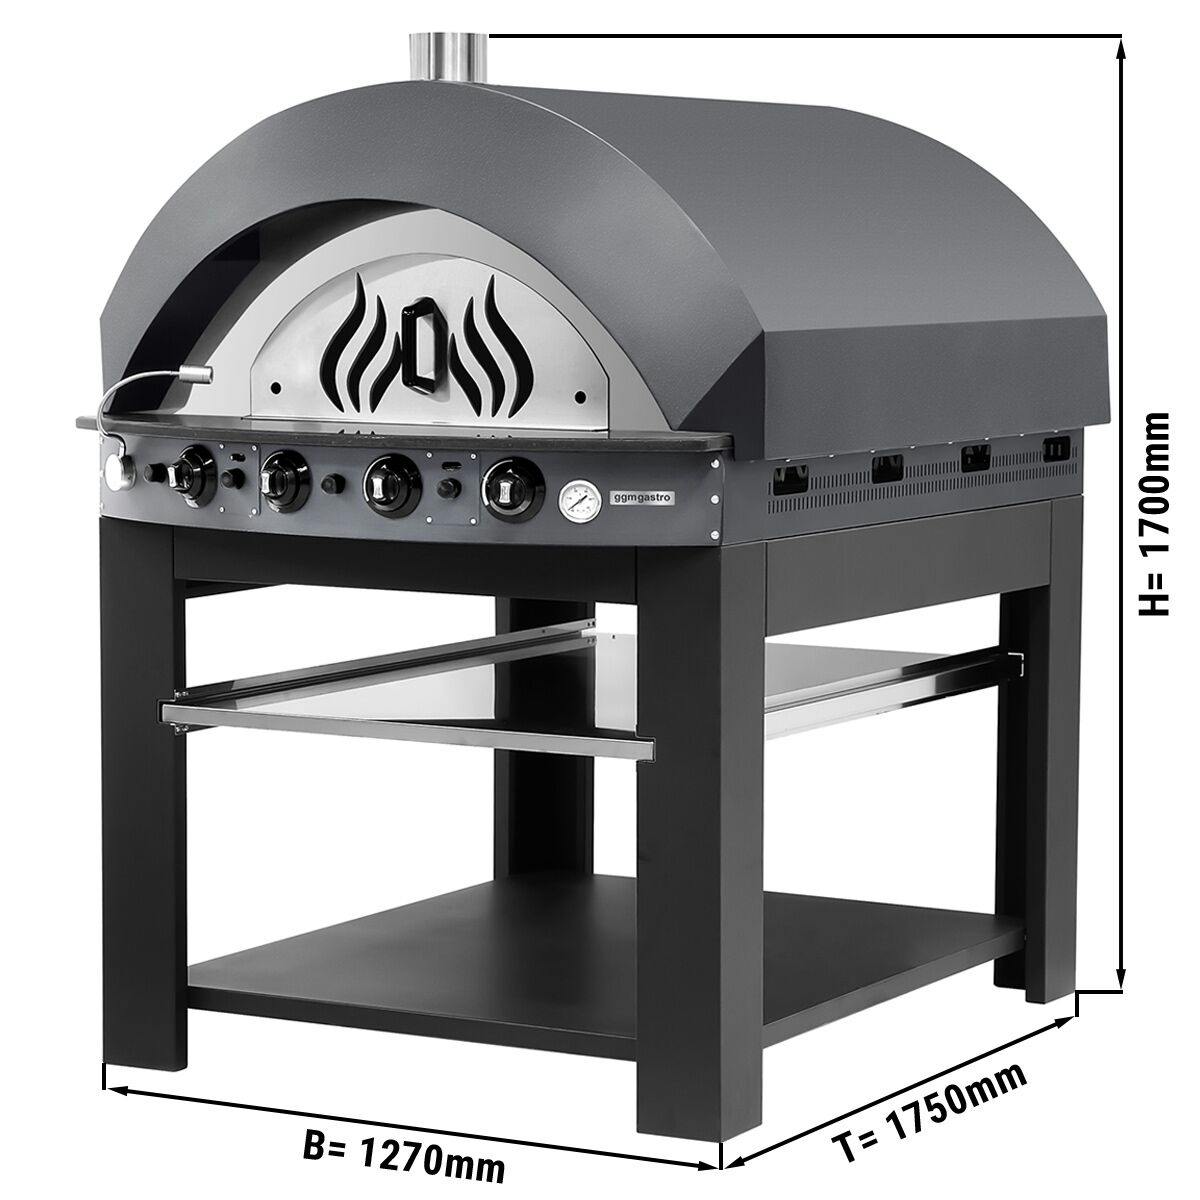 Gas pizza oven - anthracite - 11x 25cm - manual - incl. base frame